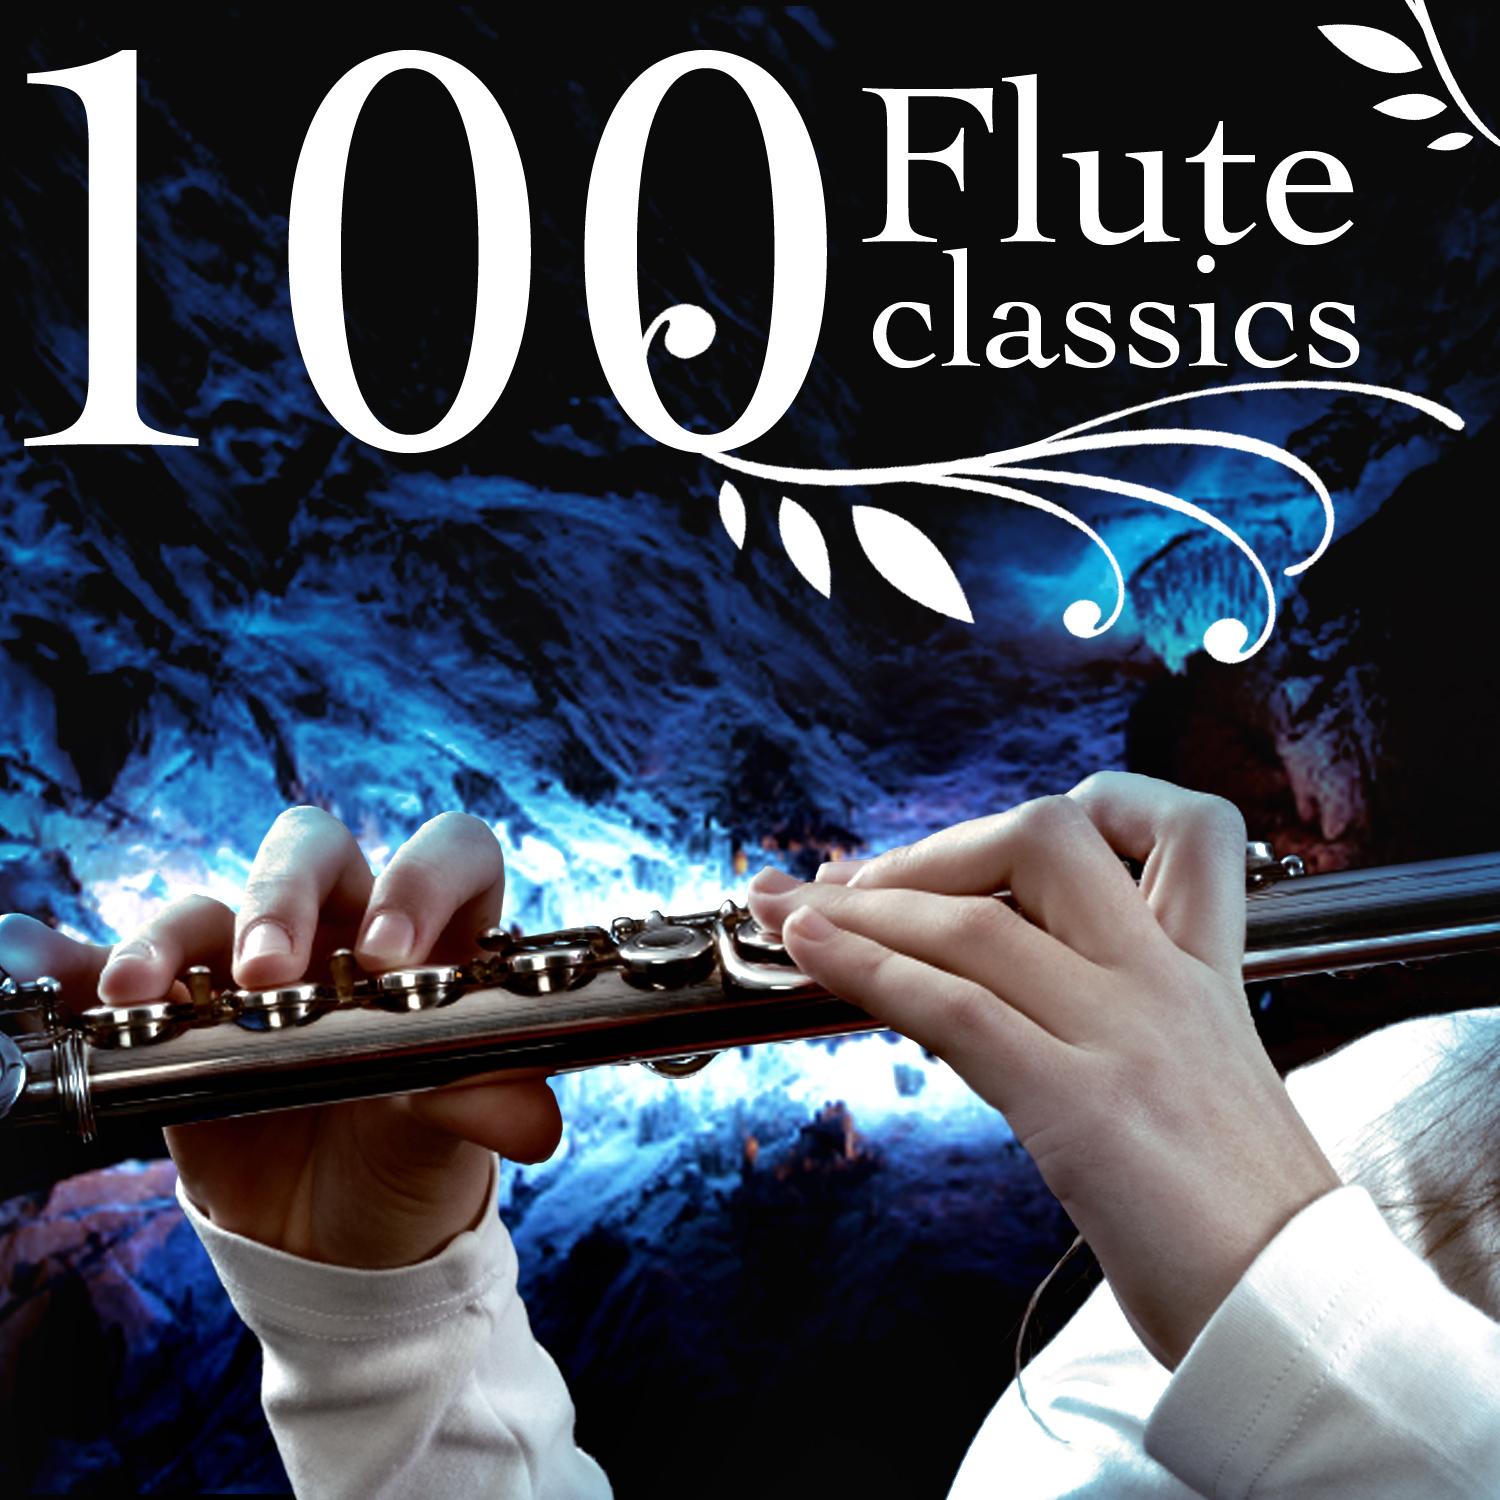 Concerto For Flute And Orchestra In D Major, K 314:III. Allegro